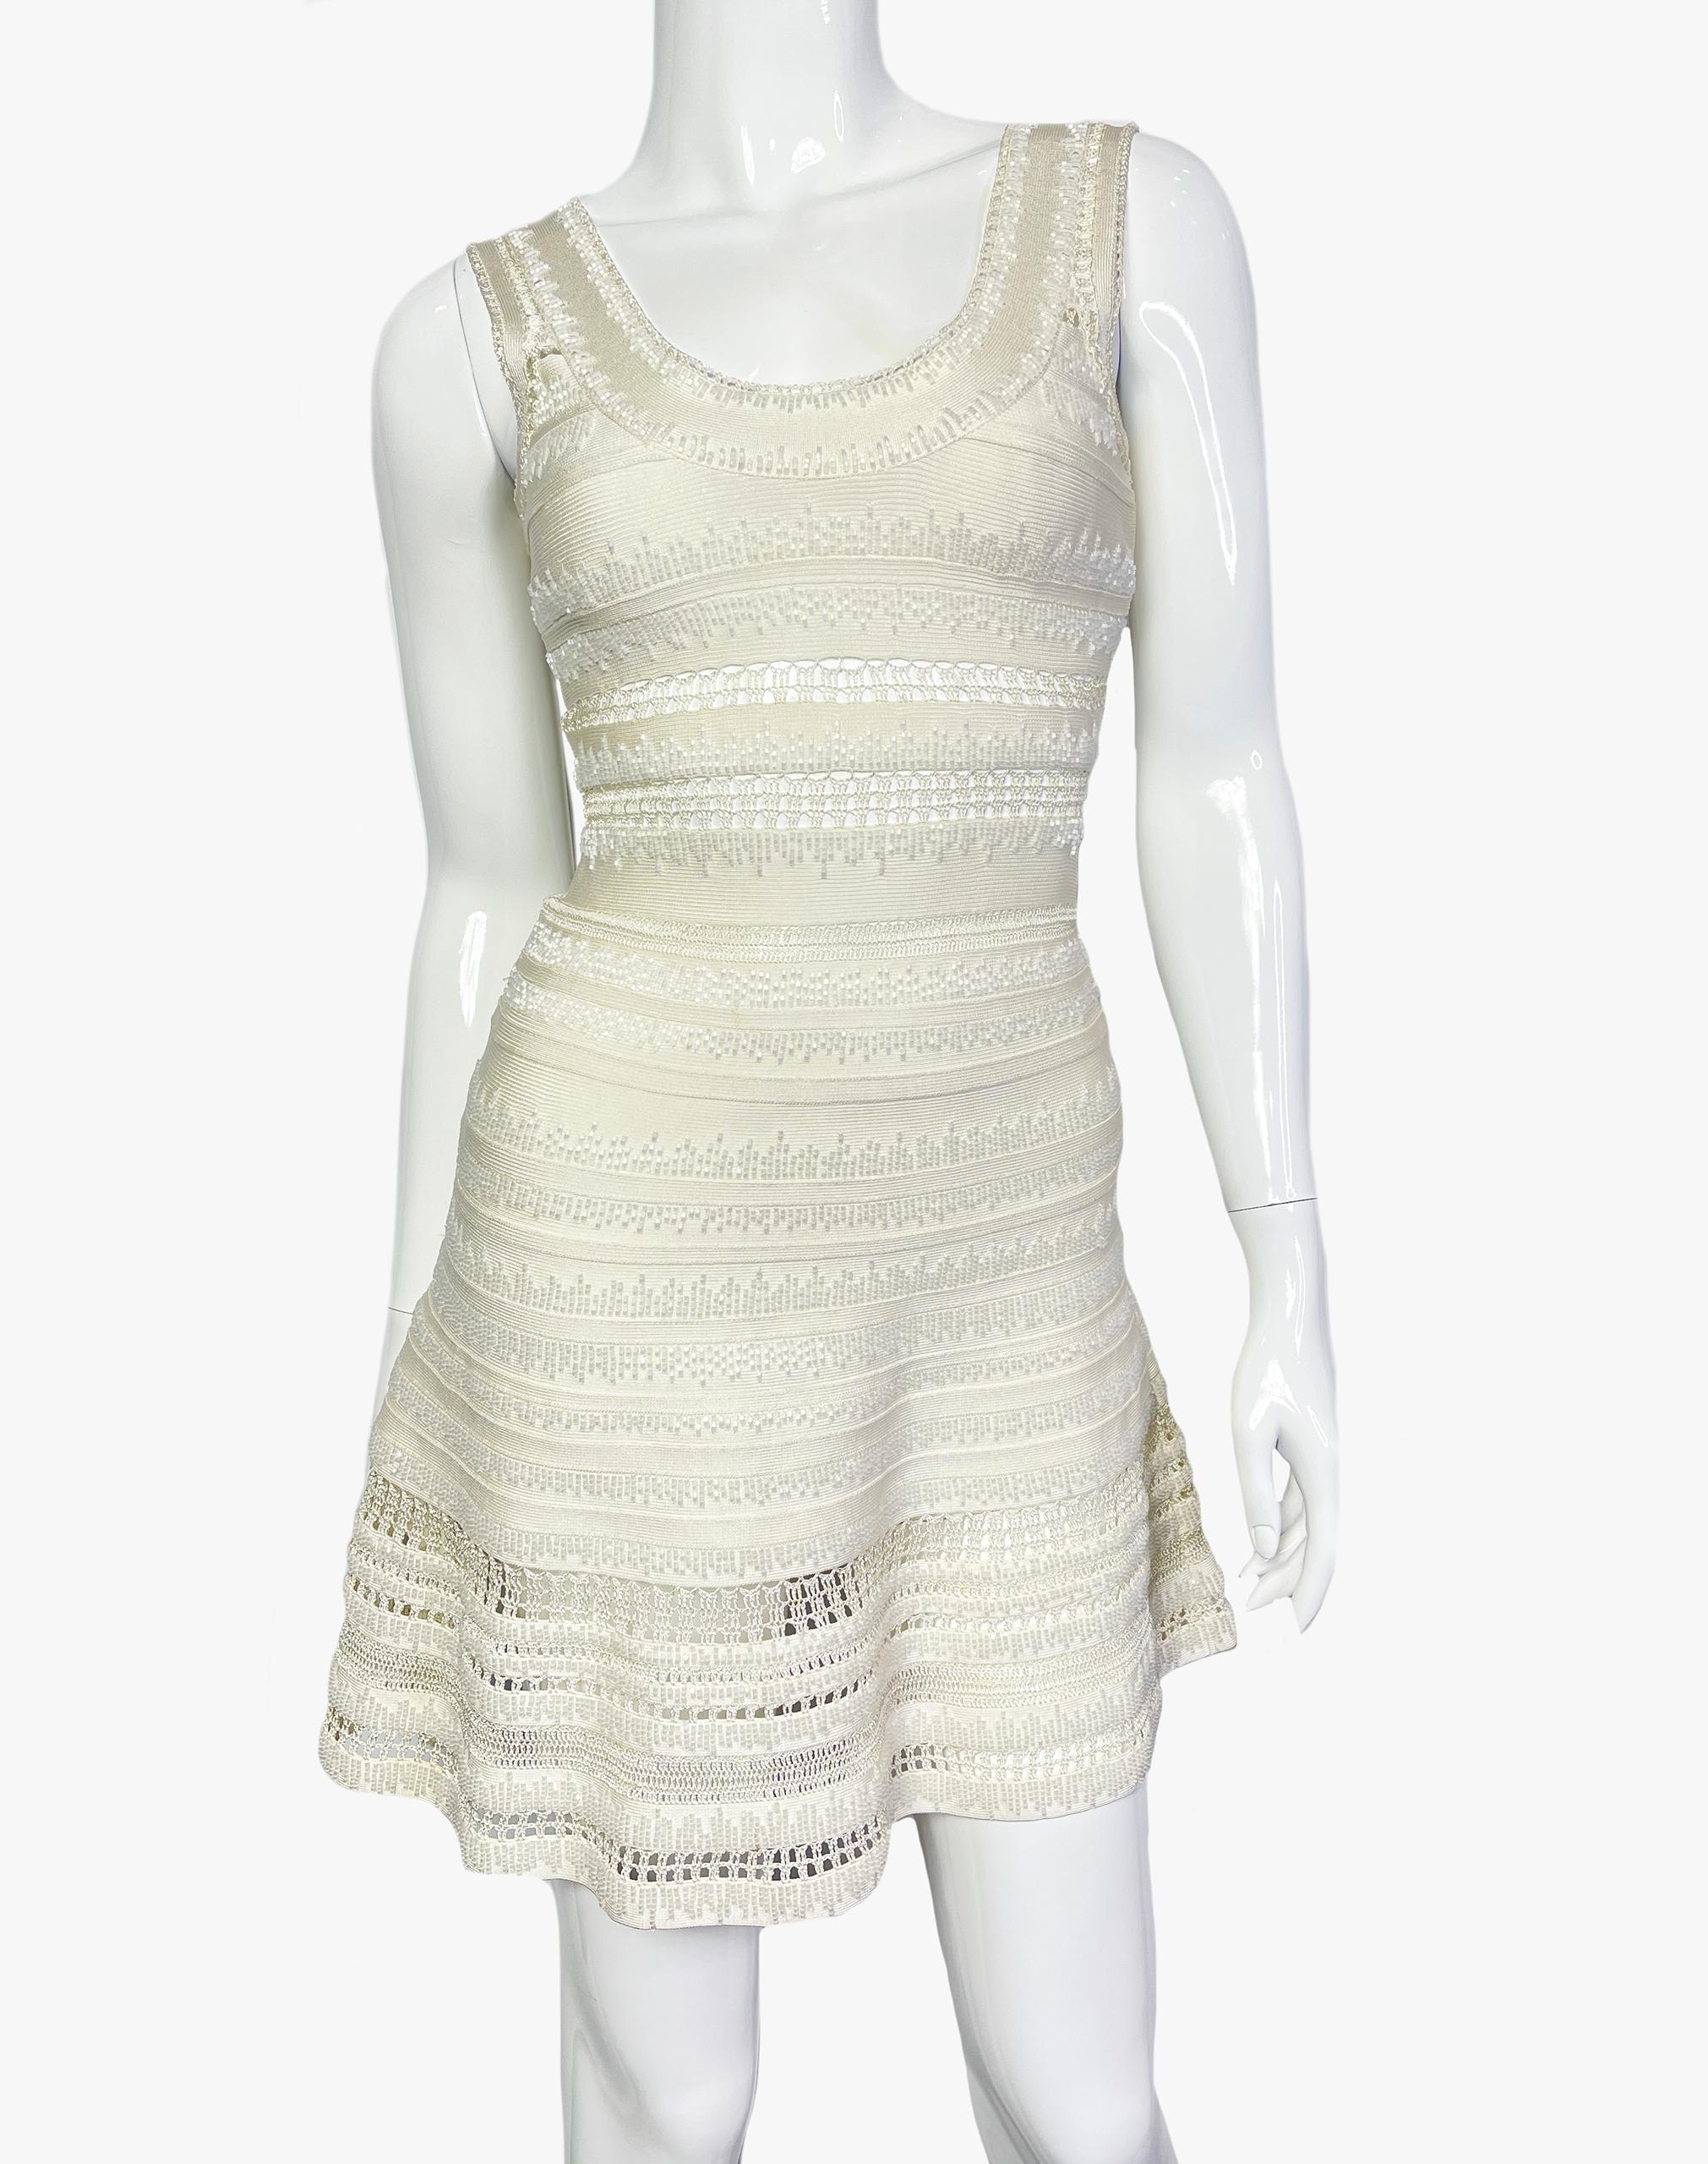 Herve Leger bandage dress embroidered with beads.
Period: 2000s
Sleeveless, fastens with a zipper at the back.
Size: XS
Condition: good, here are a few stains. 

........Additional information ........

- Photo might be slightly different from